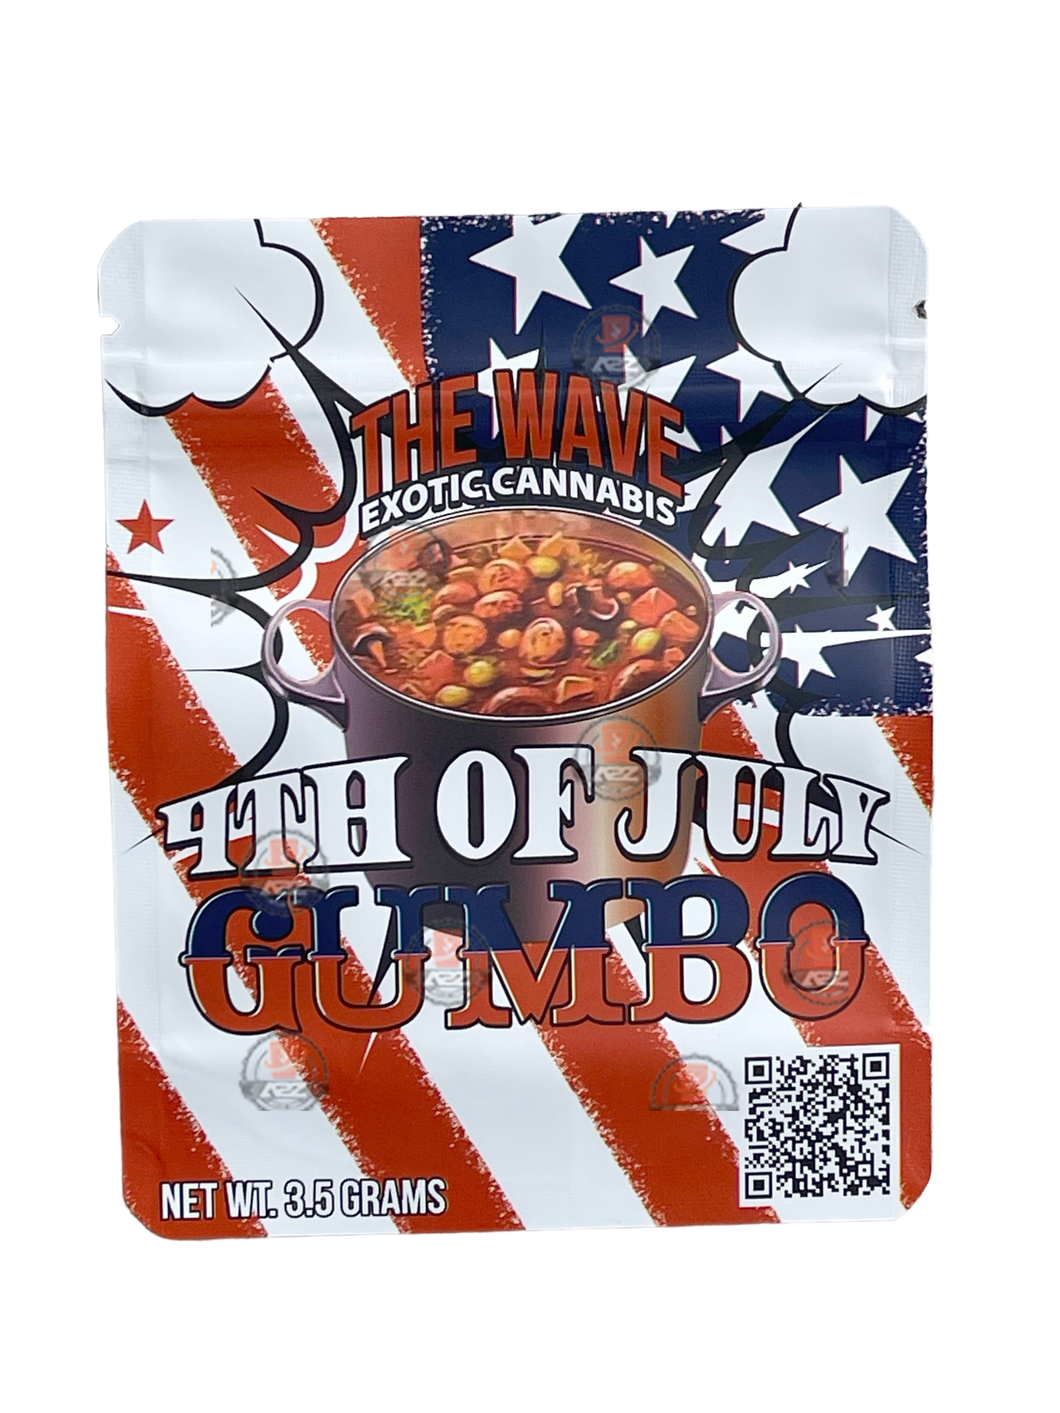 4th of July Gumbo Mylar Bags 3.5g The Wave